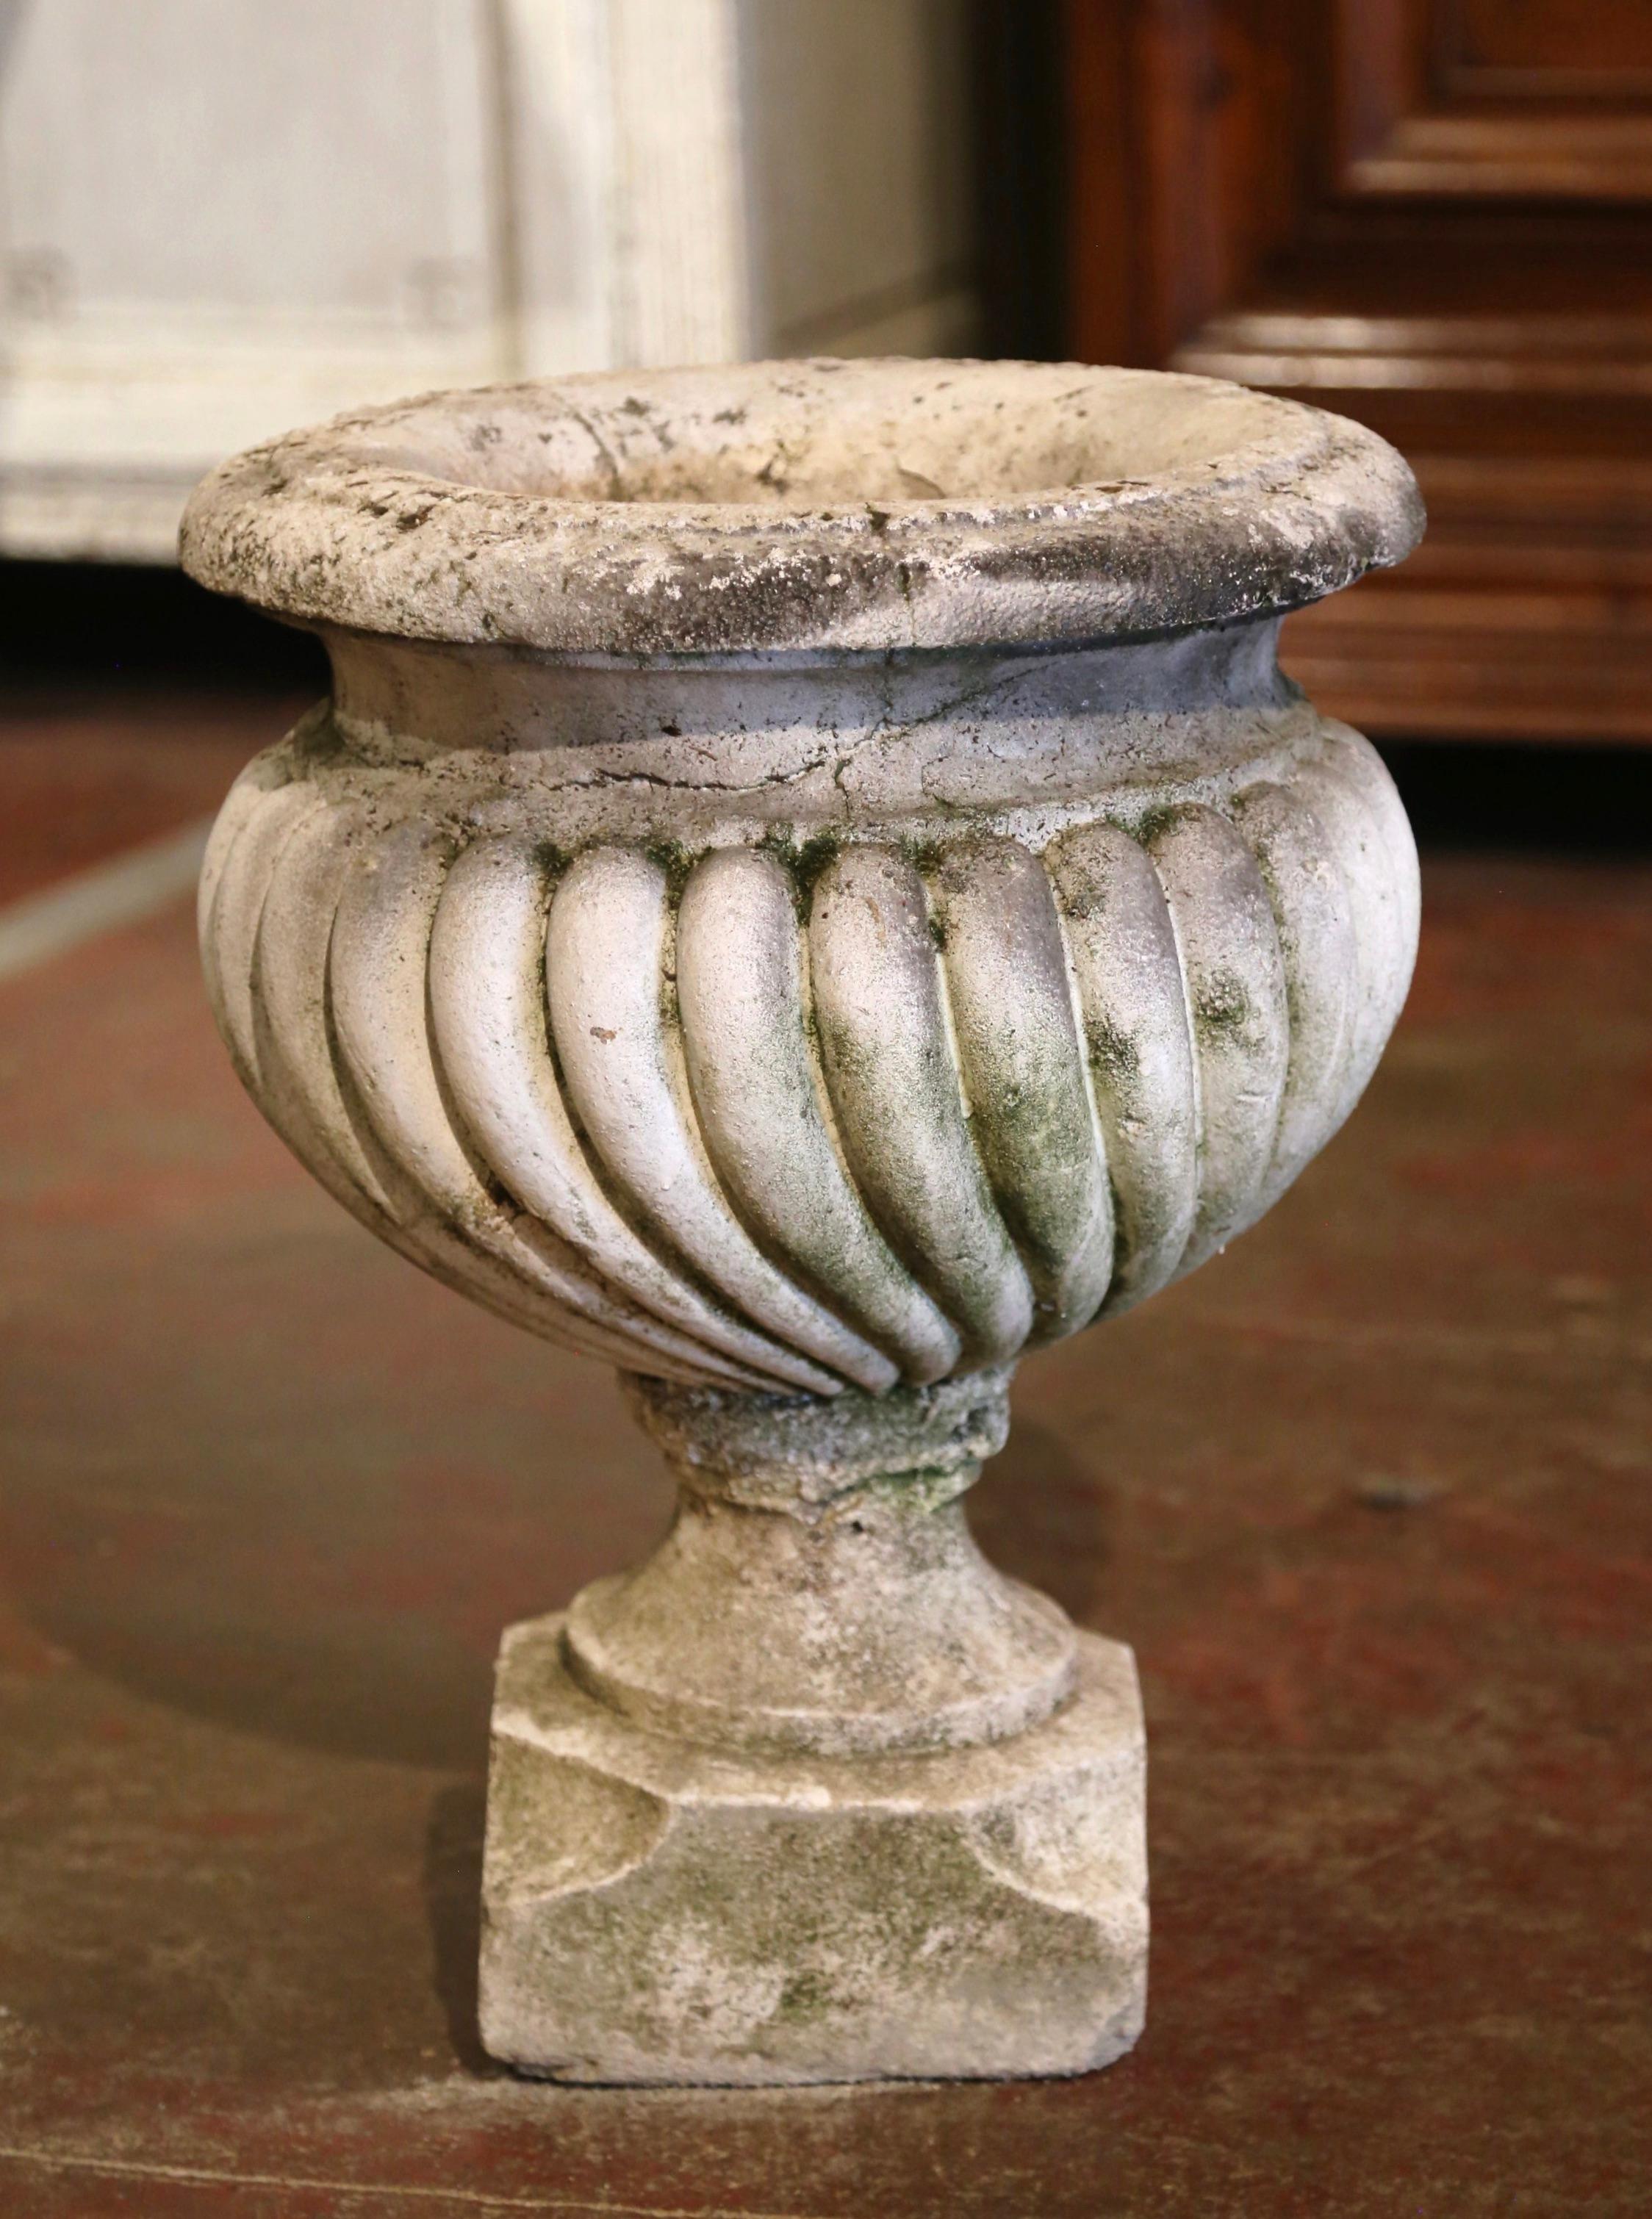 This antique stone planter was crafted in Normandy, France, circa 1750 was found in a chateau around Versailles. Round in shape with flare rim and ribbed and gadrooned body, the heavy vase stands on an integral square base with cut corners. The